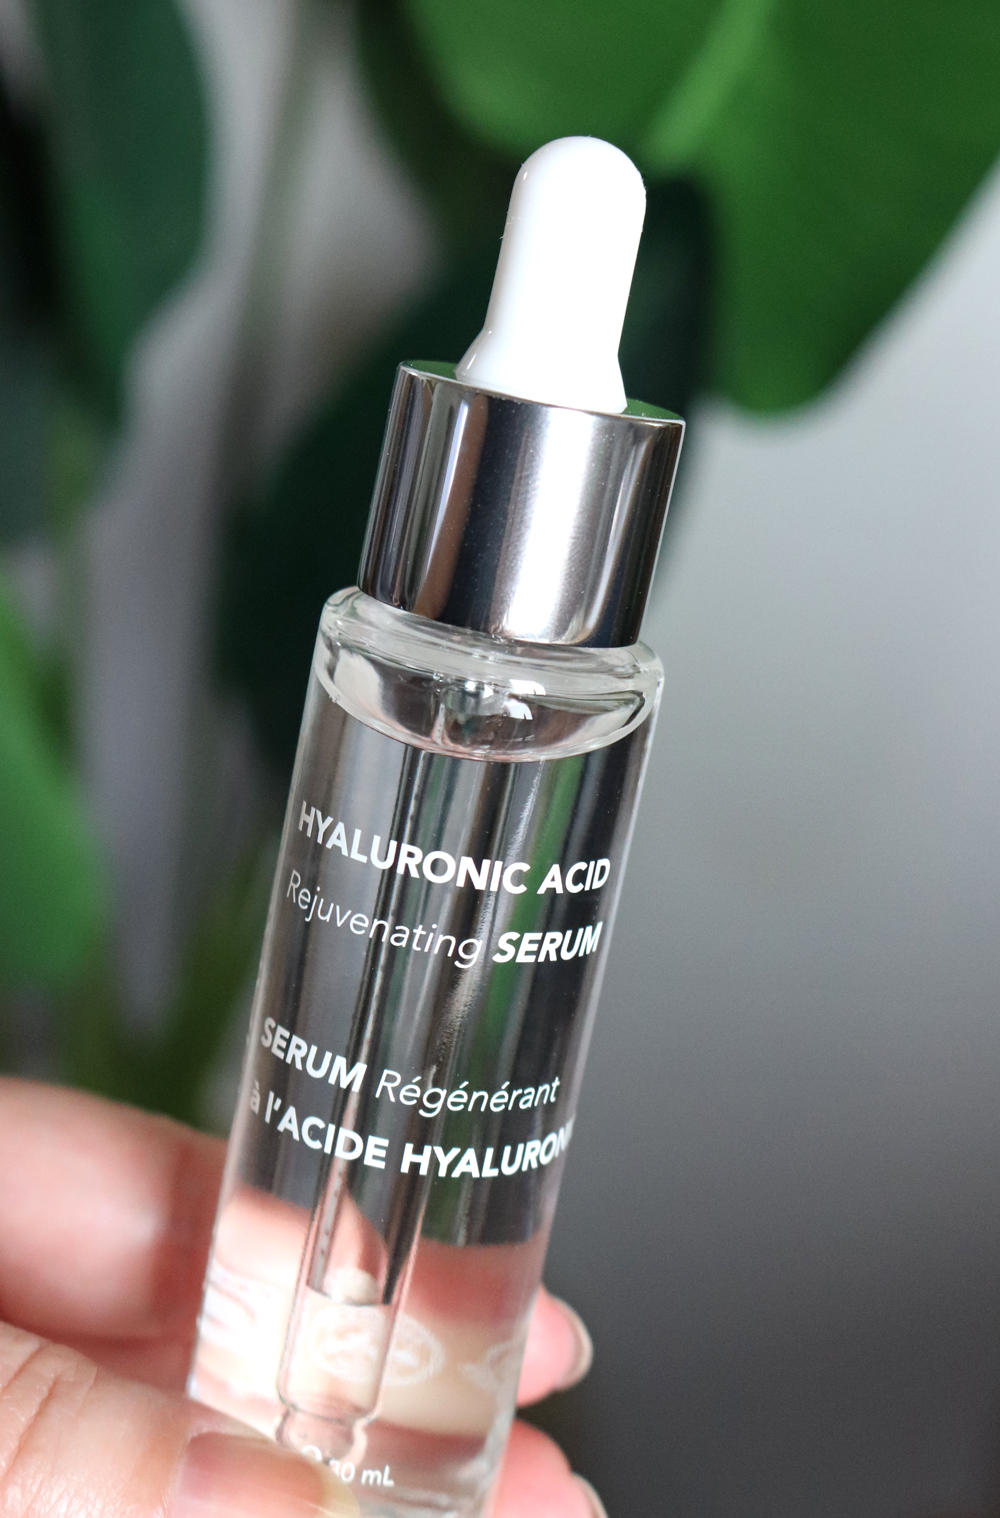 Studio Makeup Cruelty Free Hyaluronic Acid Rejuvenating Serum Review and Giveaway